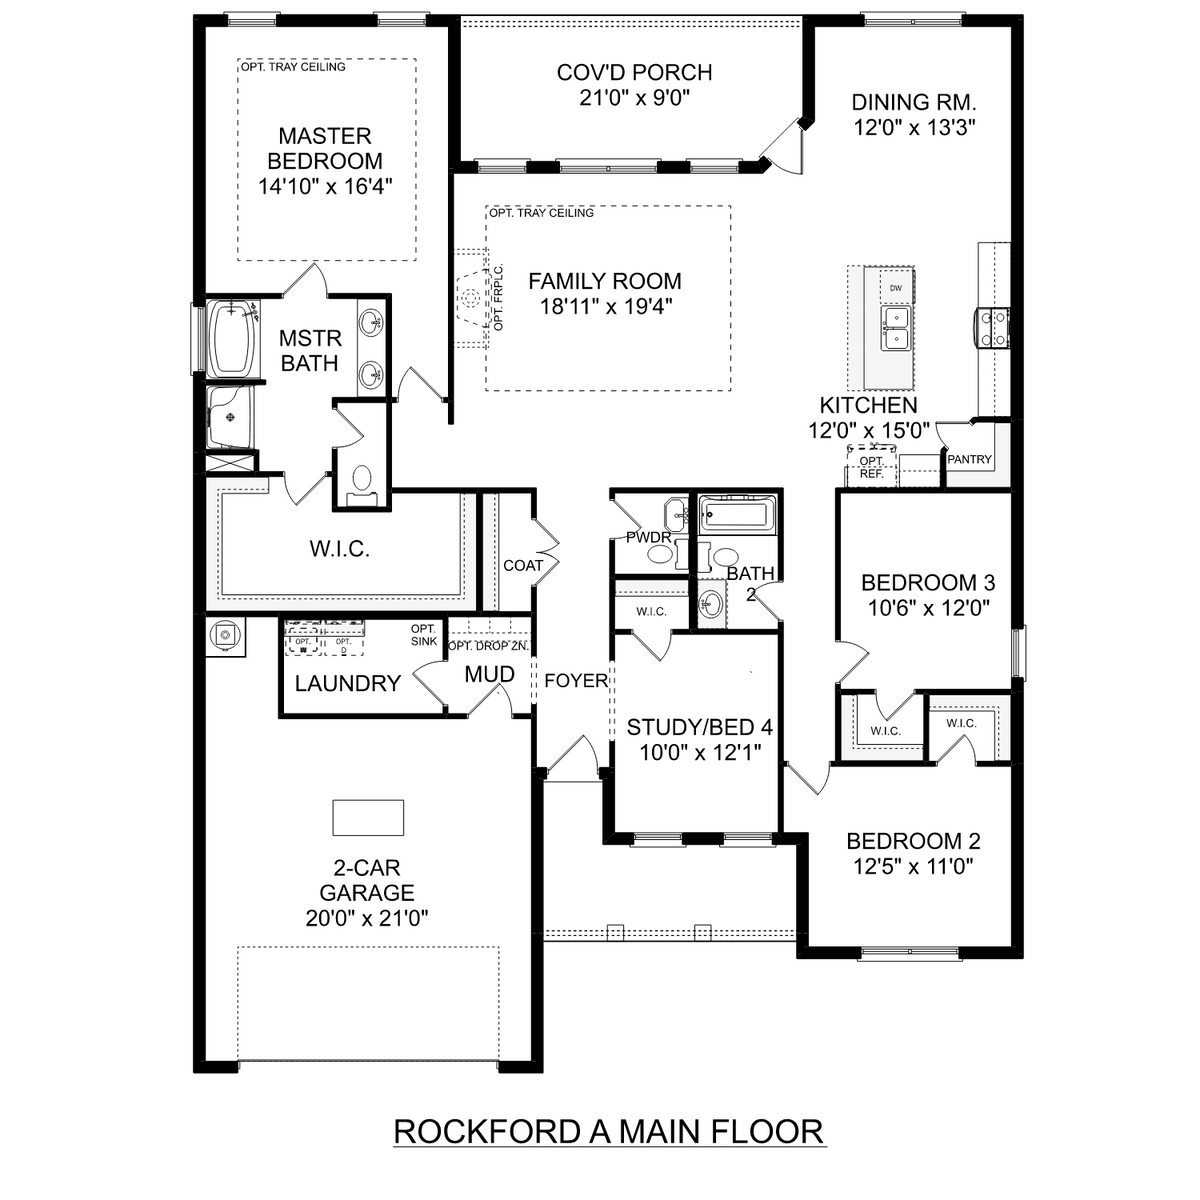 1 - The Rockford floor plan layout for 103 Nellies Way in Davidson Homes' Pikes Ridge community.